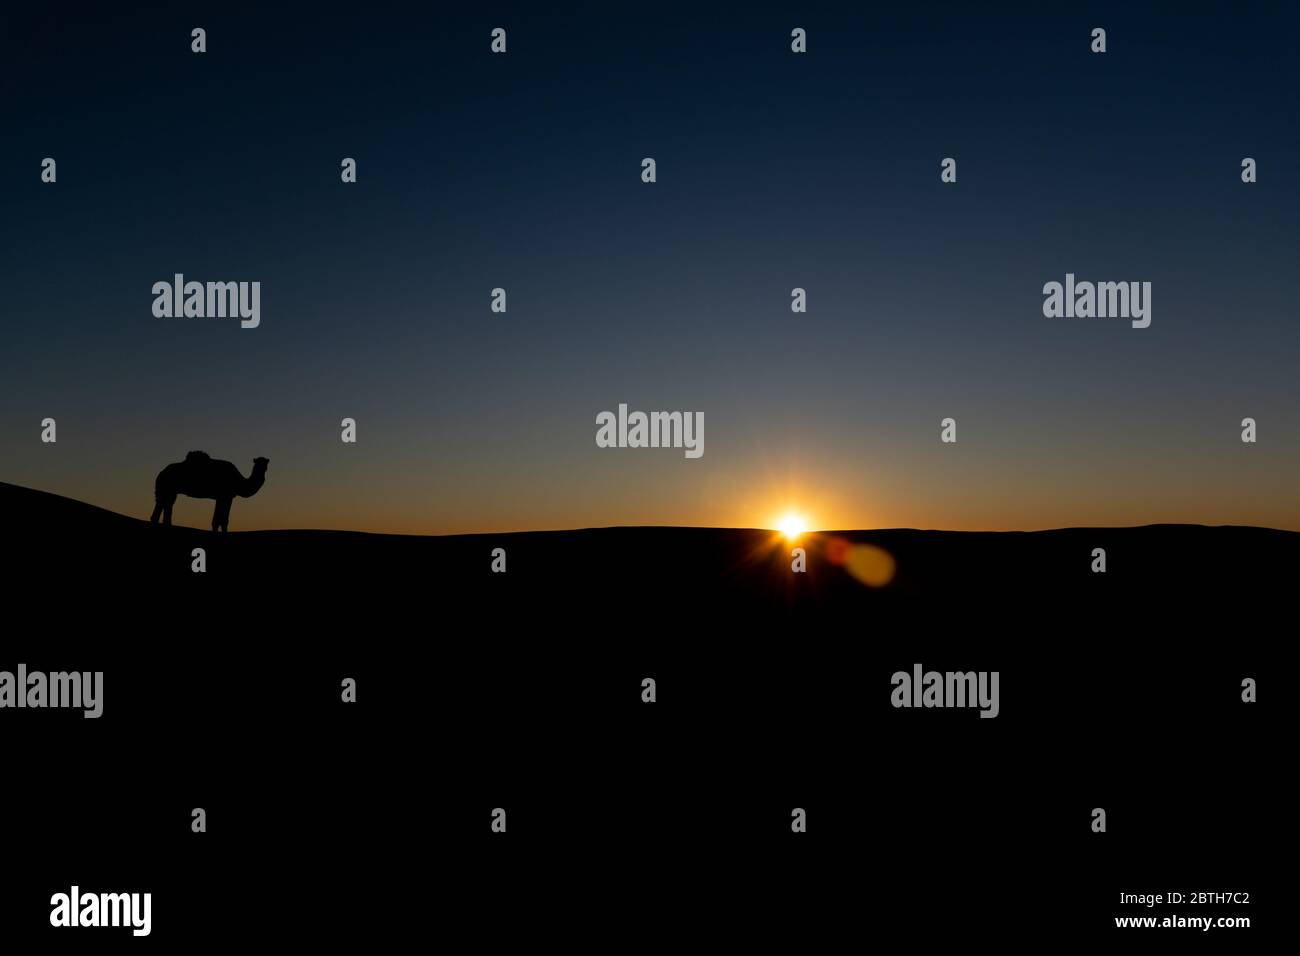 Silhouette of a Camel in Sahara Stock Photo